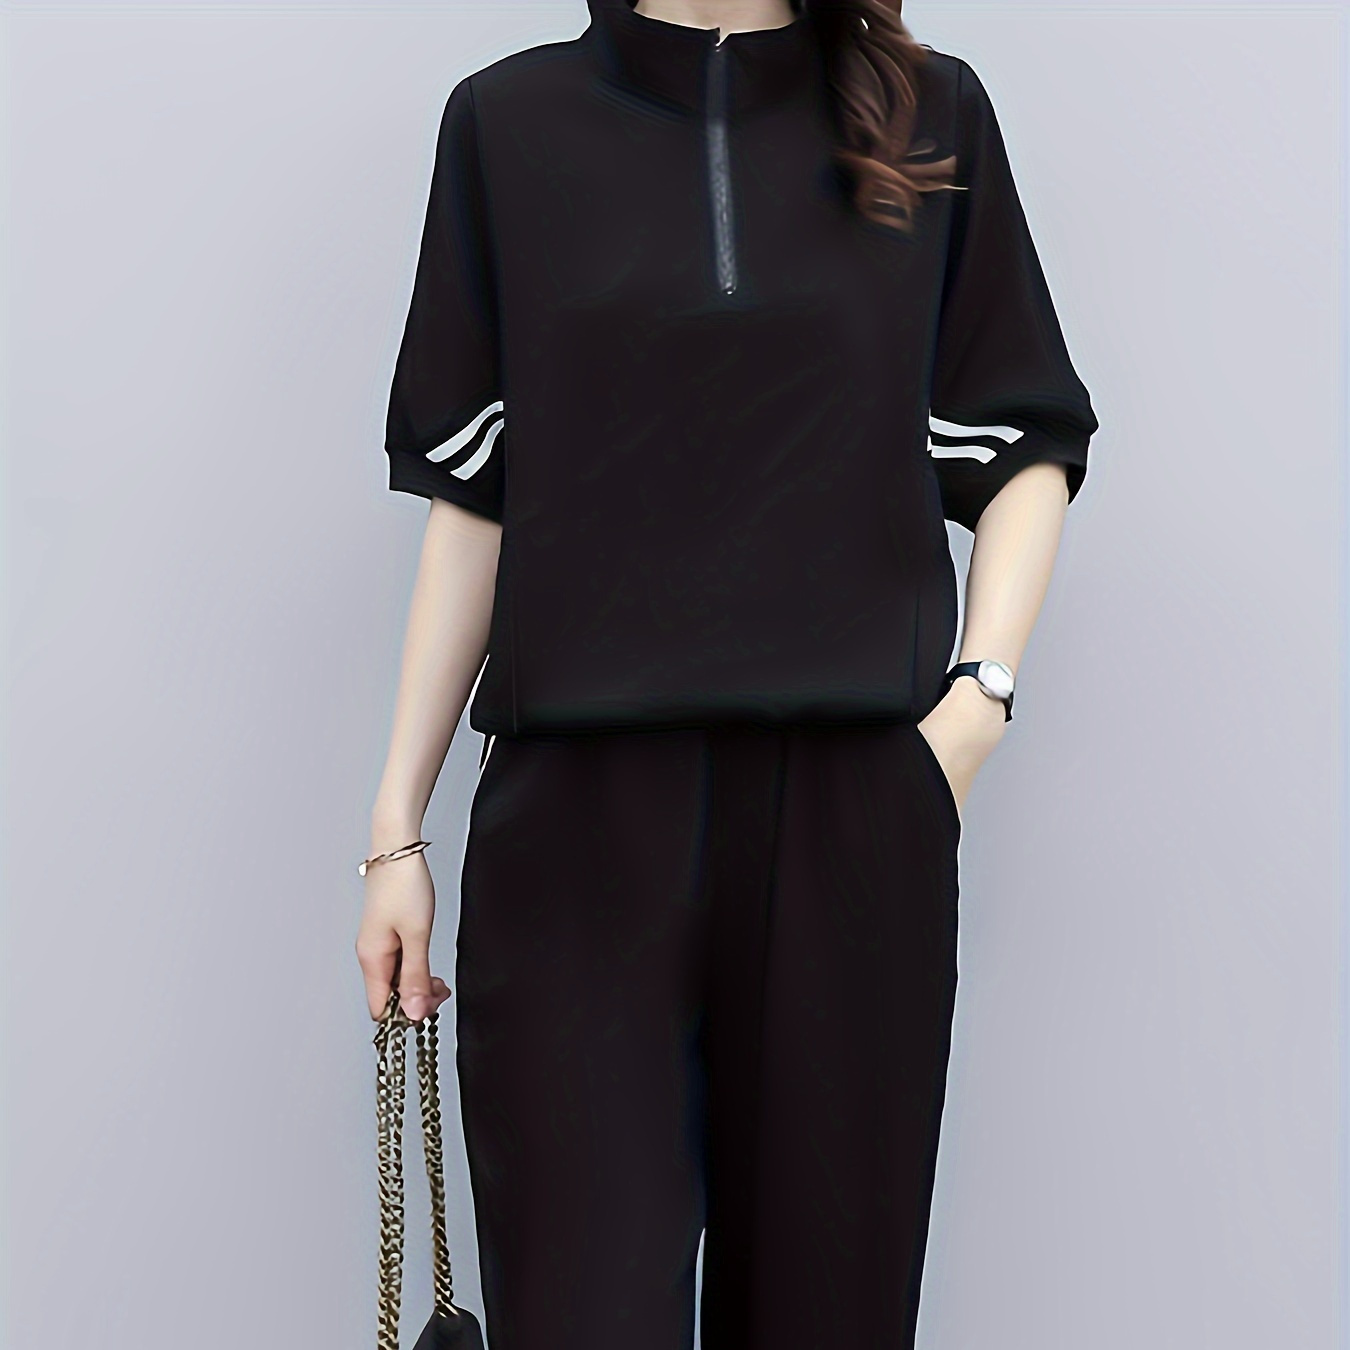 

Striped Sporty Casual 2 Piece Set, Zip Up Batwing Sleeve Top & Pocket Fitted Bottom Pants Outfits, Women's Clothing